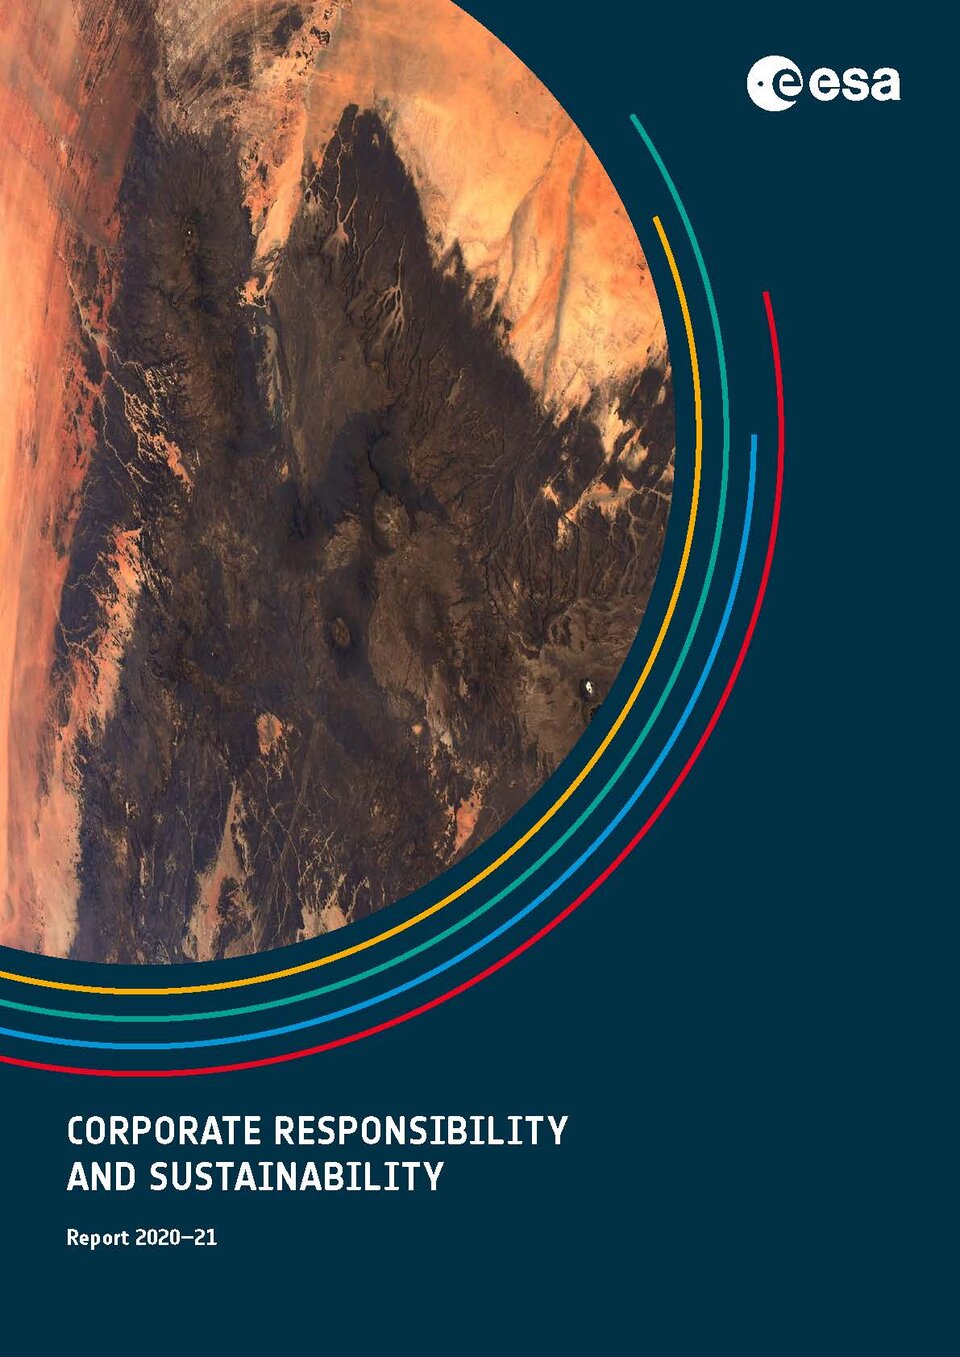 SP-1340 ESA Corporate Responsibility and Sustainability Report 2020–21